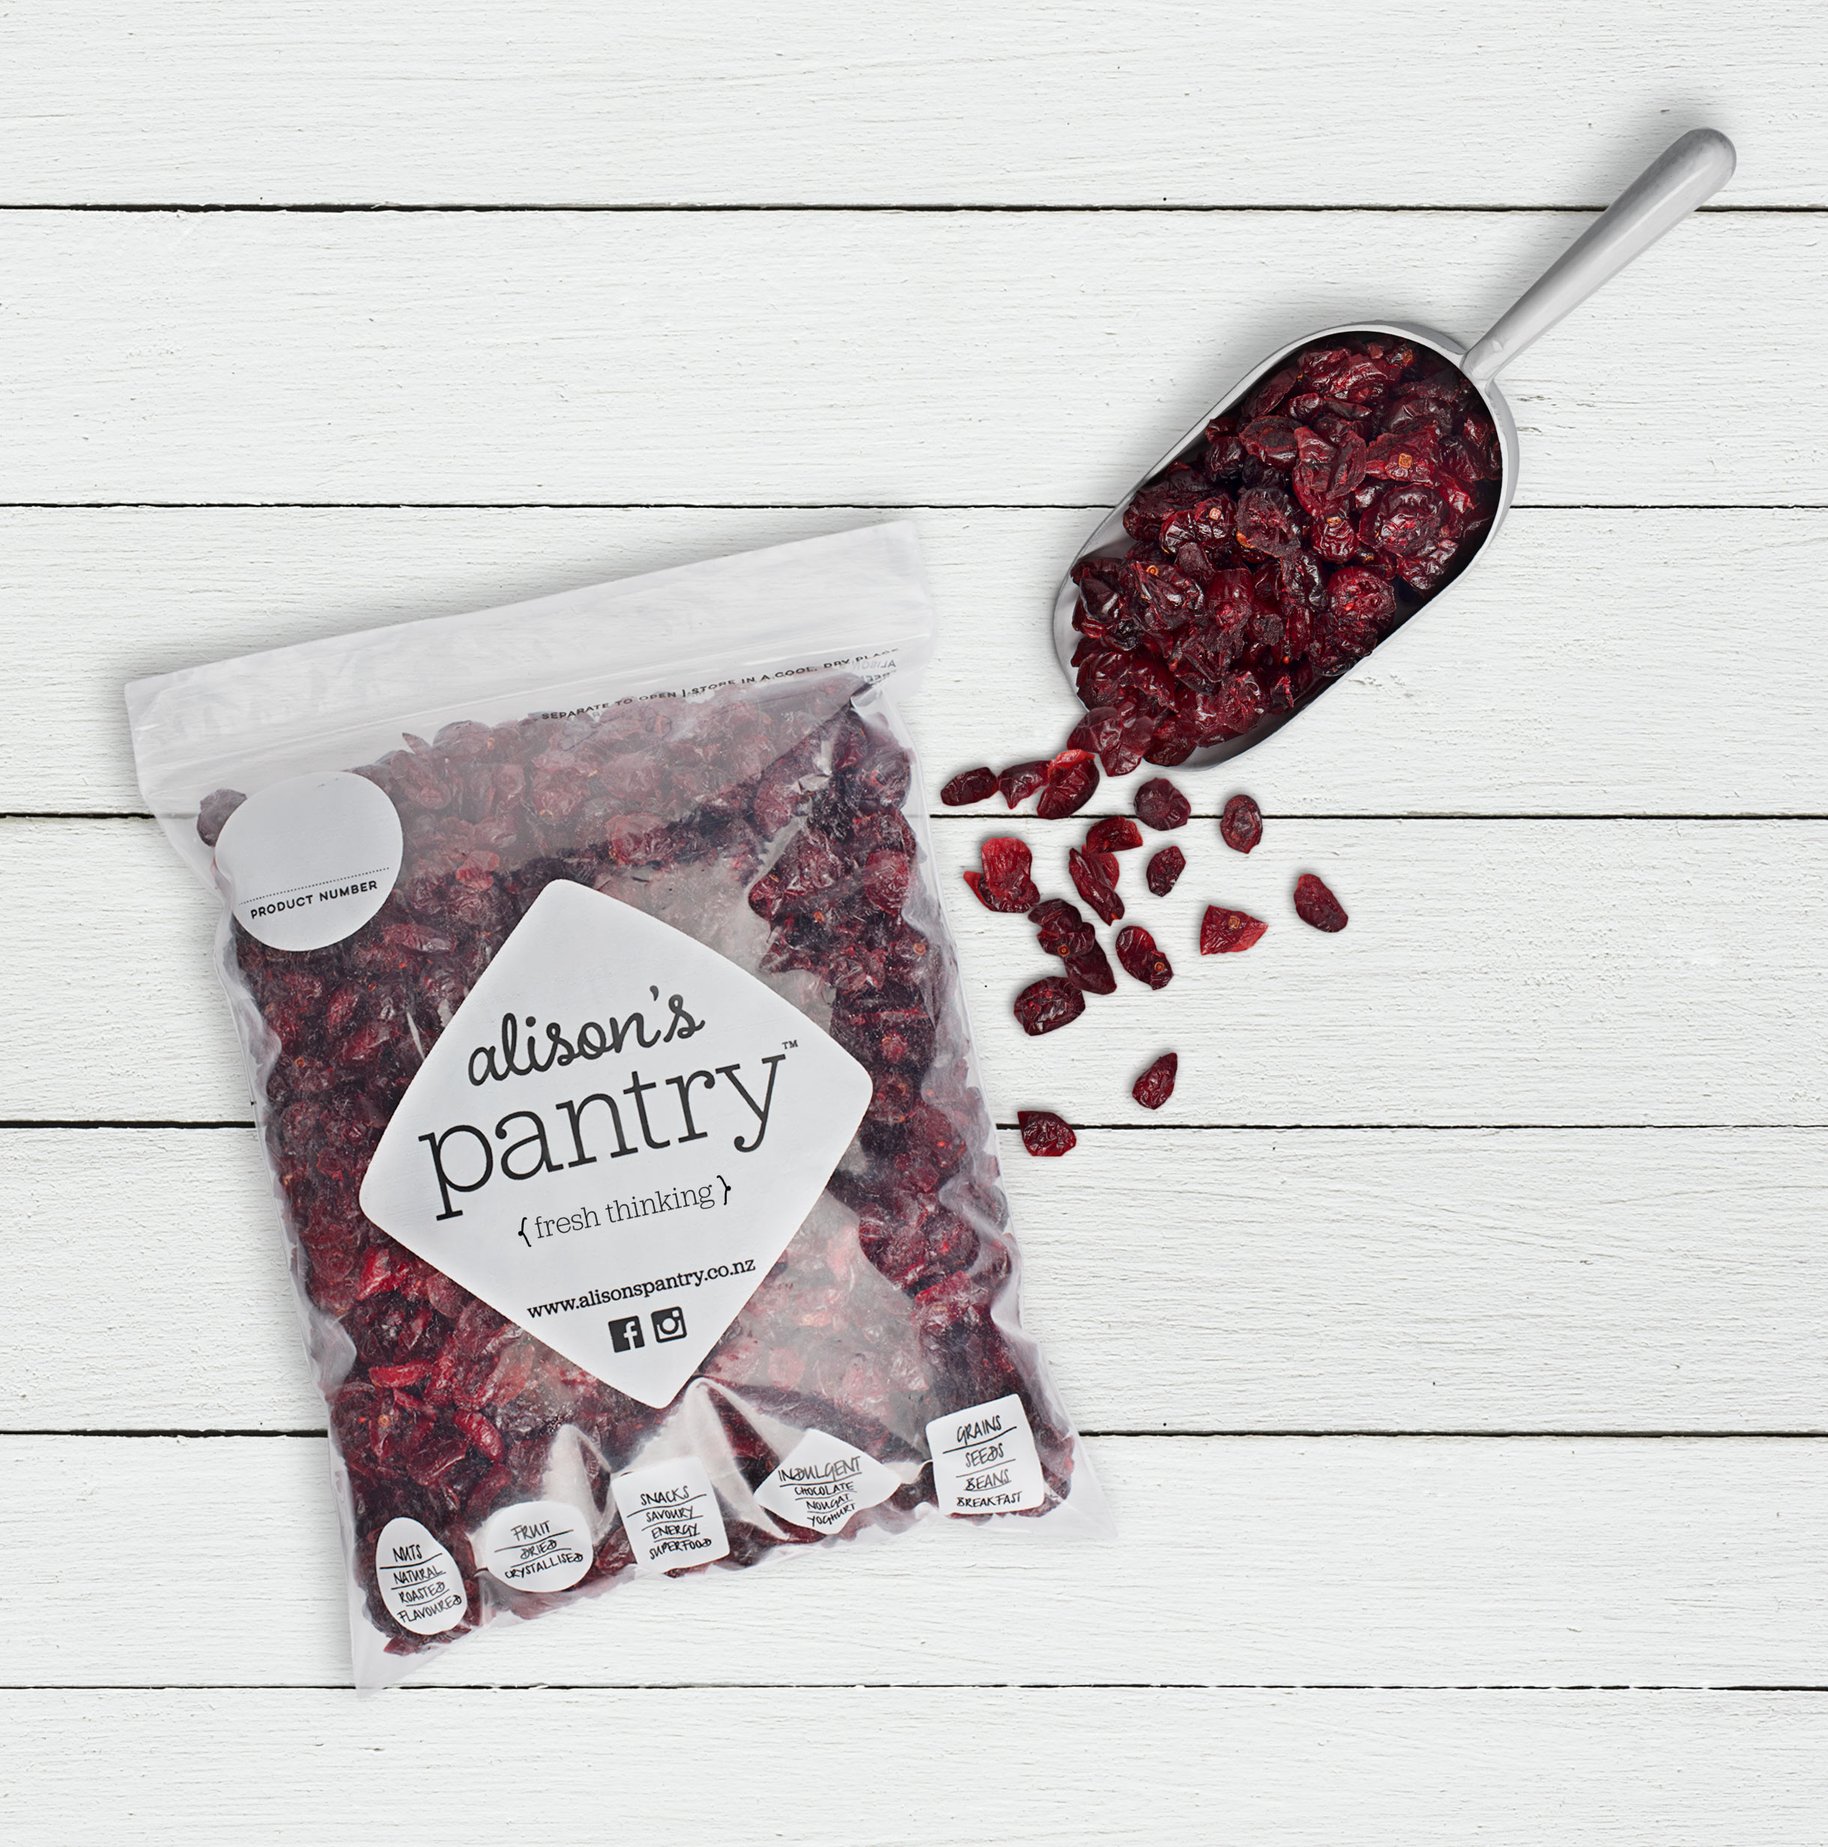 Alison's Pantry bag of cranberries and scoop photograph